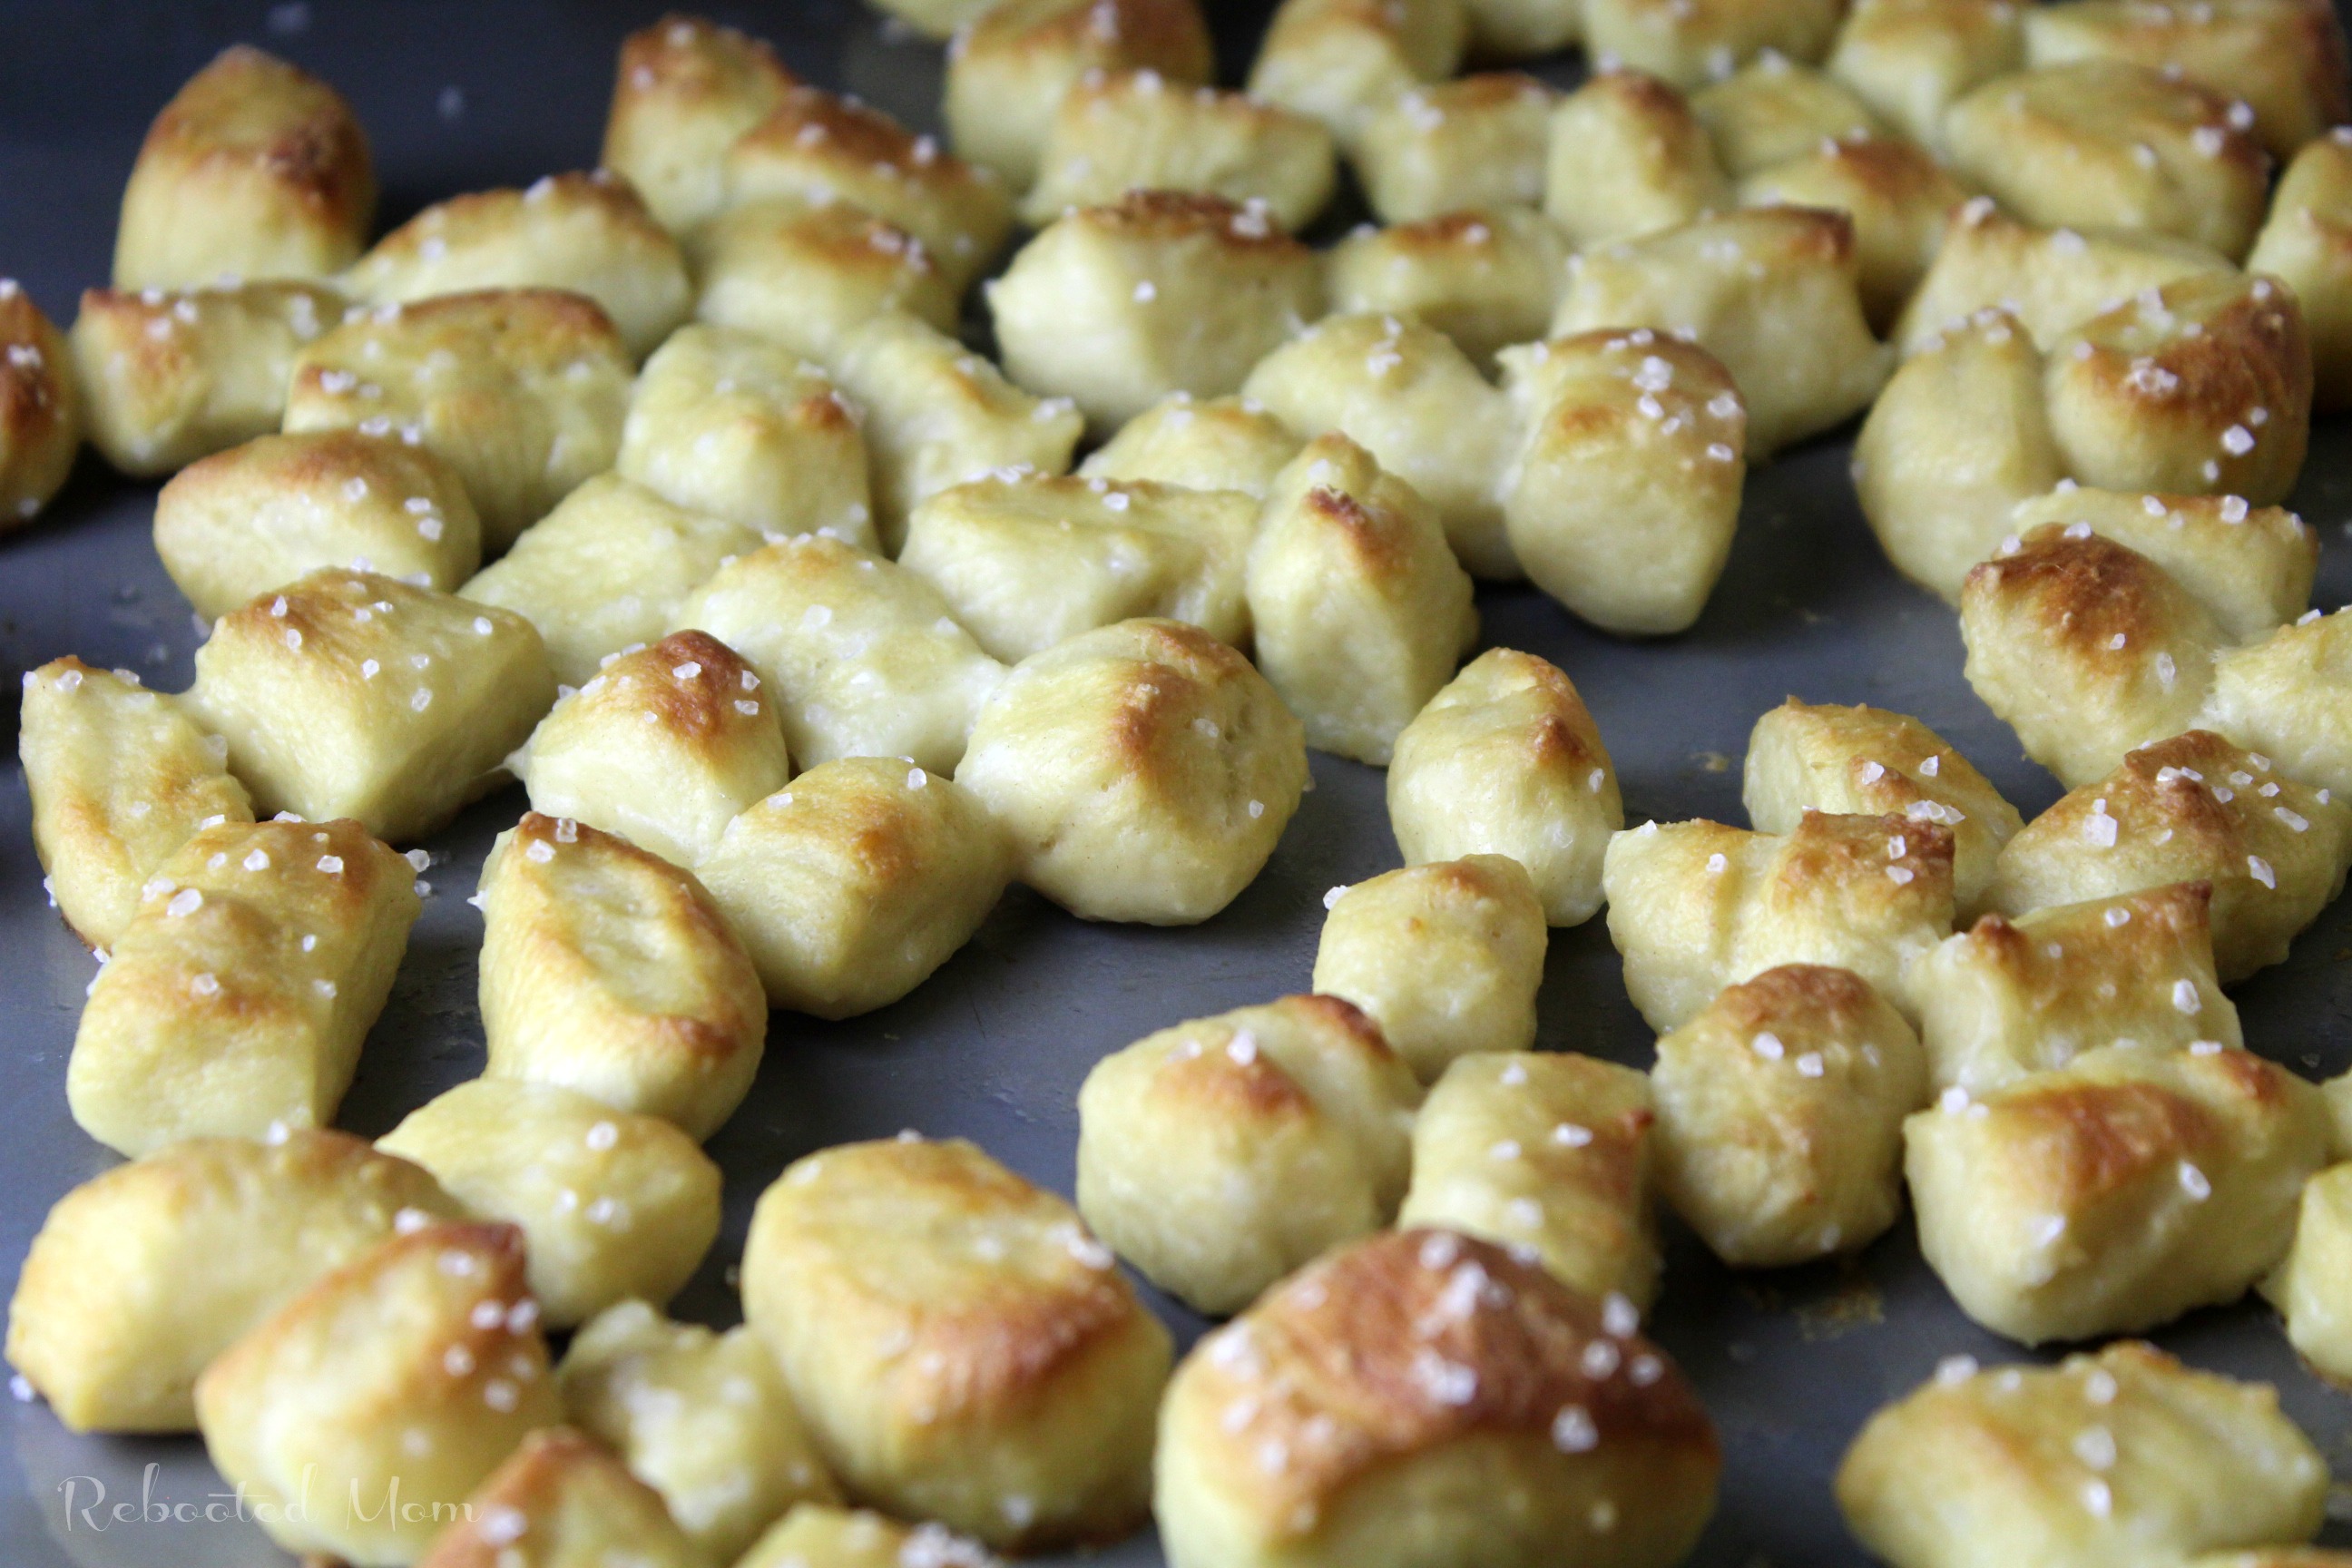 These yummy pretzel bites are simple to whip up and delicious when served as an appetizer or snack. You won't believe how easy they are to make at home!